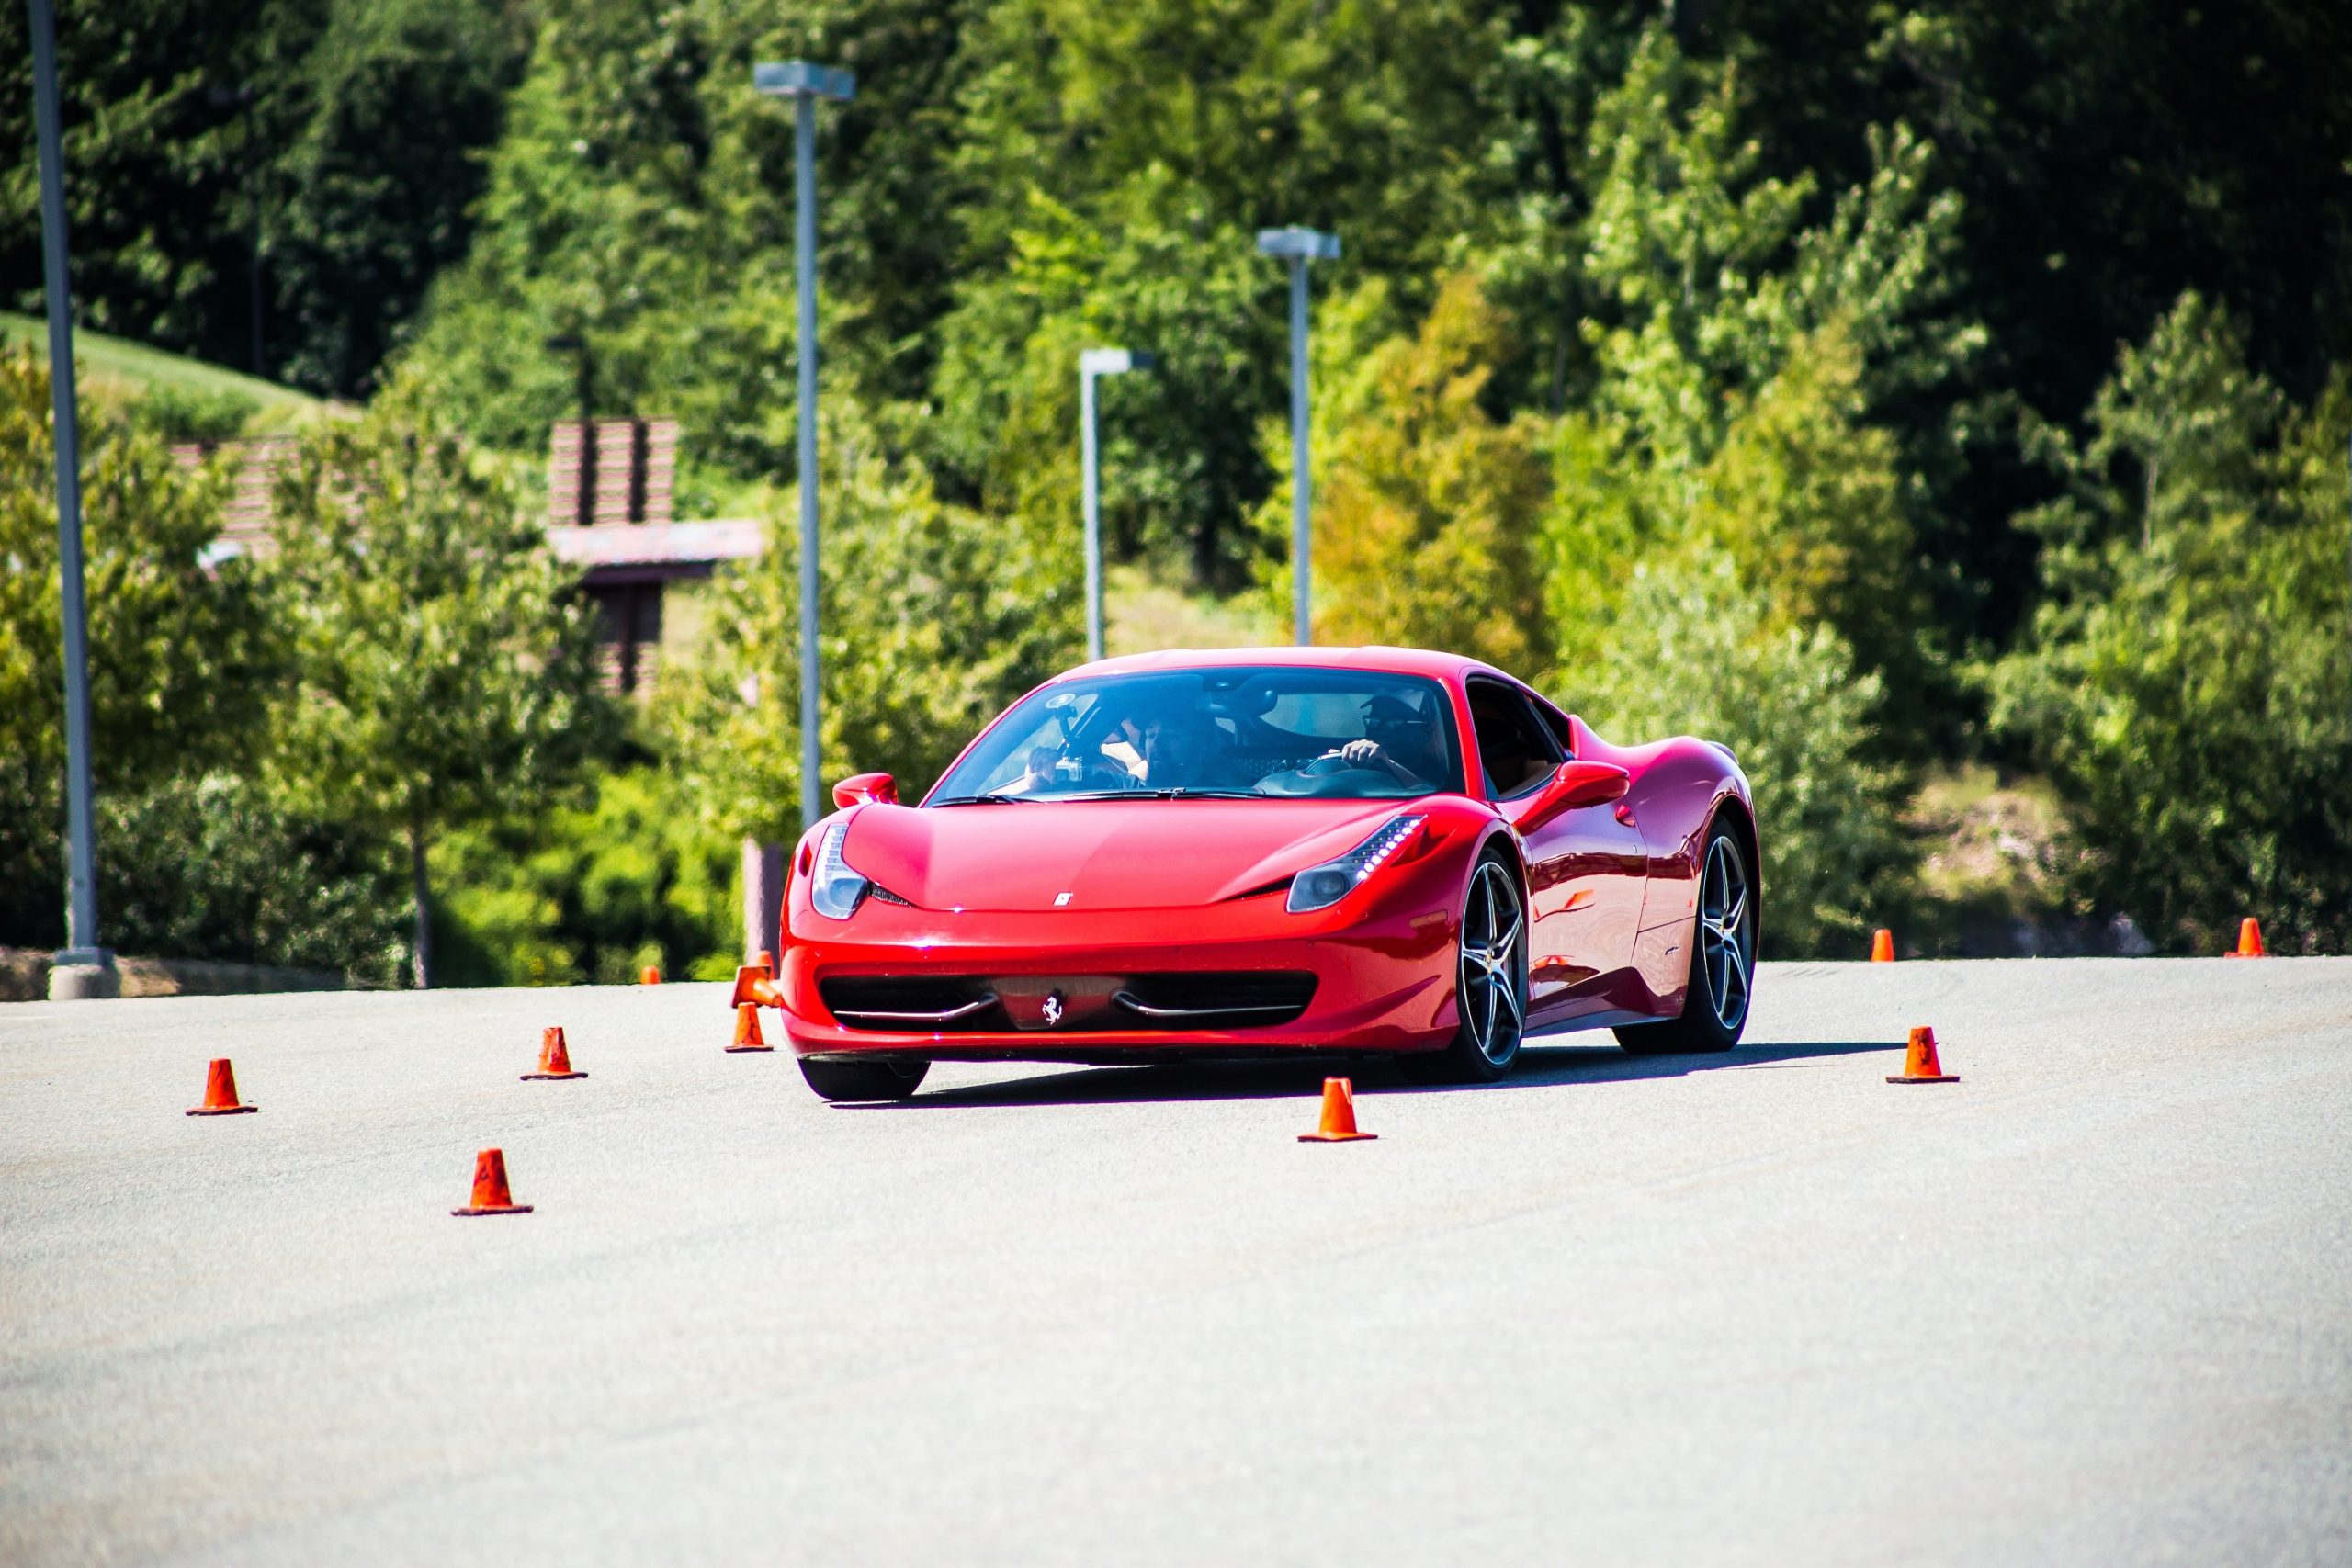 A red Ferrari 458 Italia on an autocross course, shot from the front 3/4